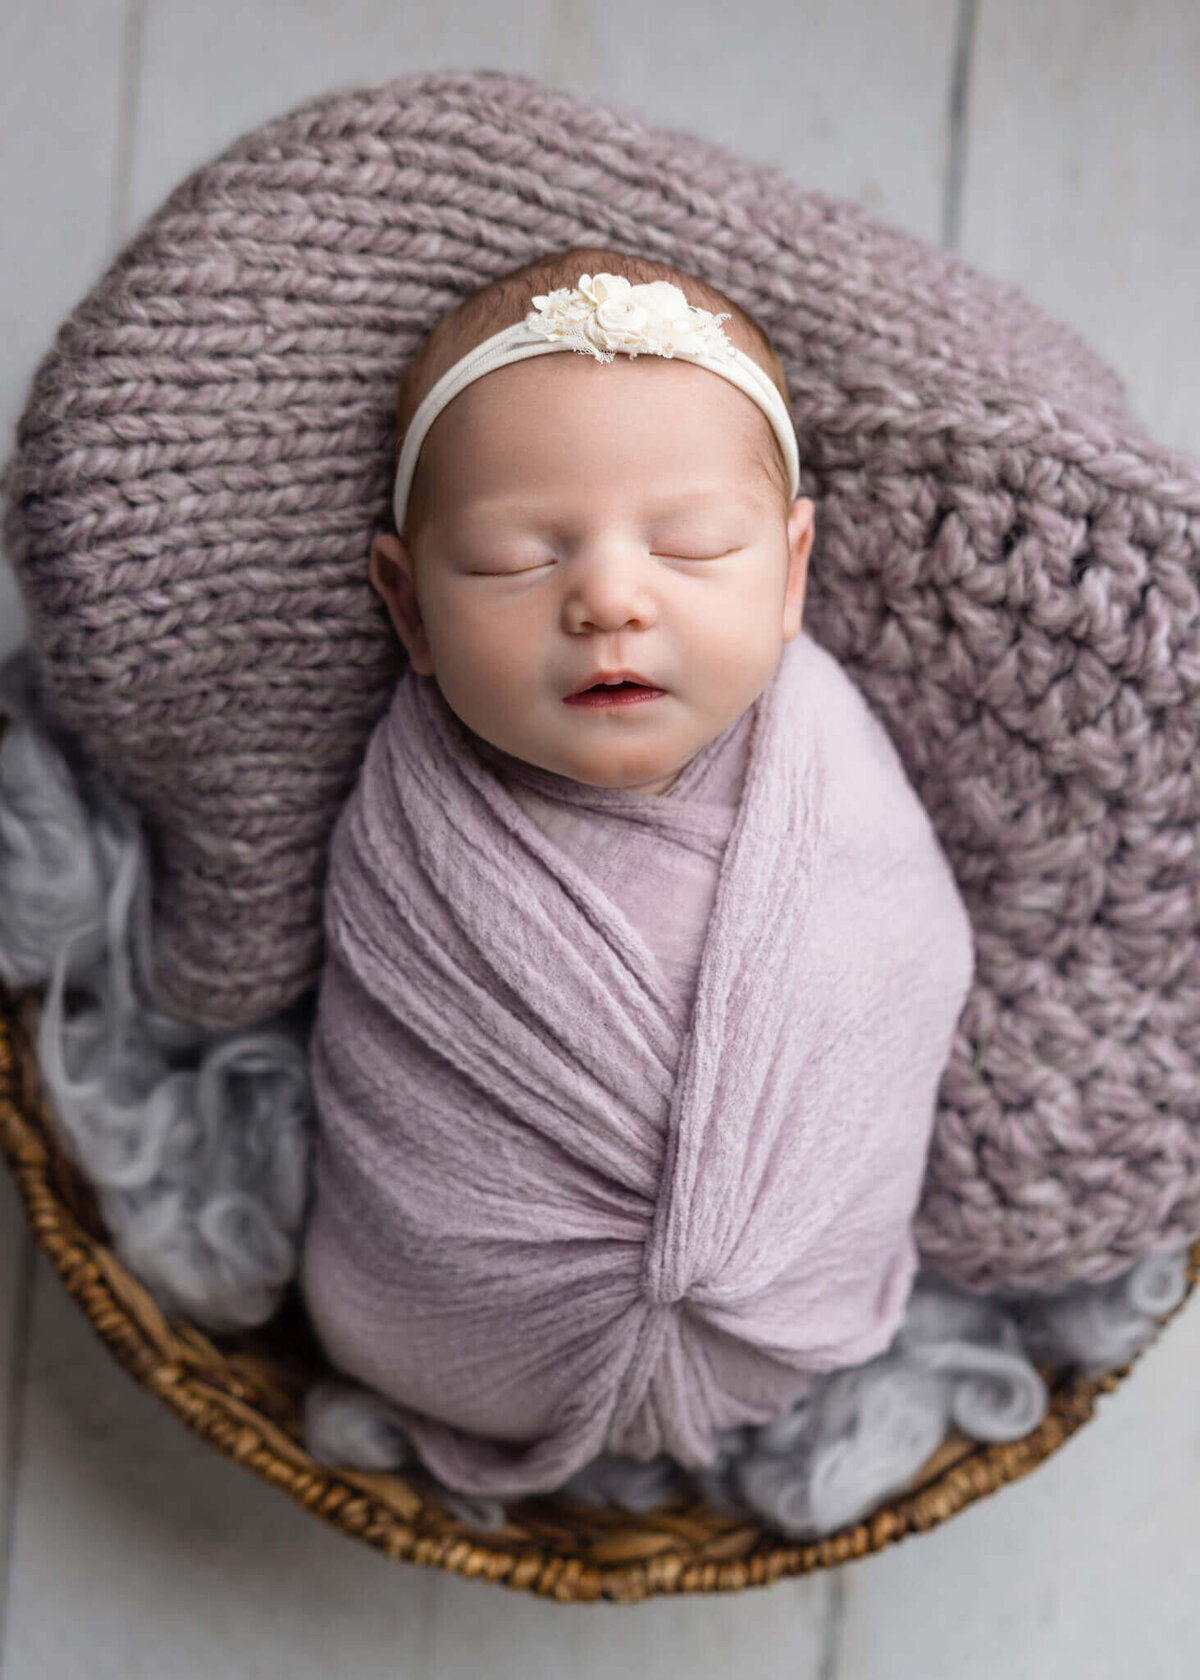 newborn baby wrapped in a purple fabric asleep in a brown bowl